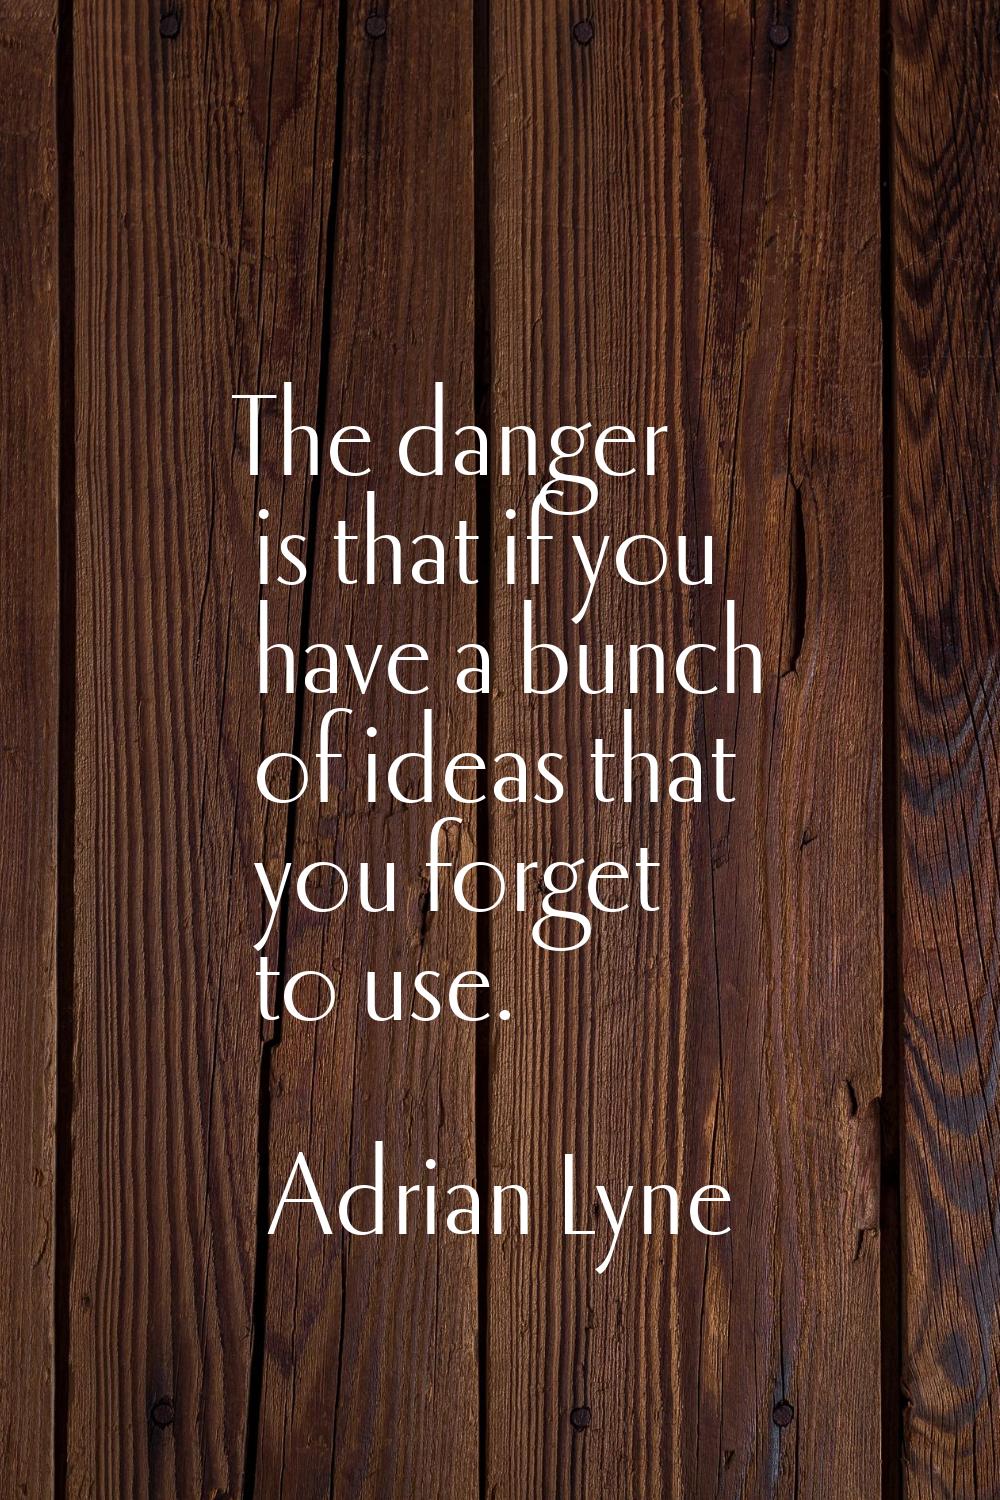 The danger is that if you have a bunch of ideas that you forget to use.